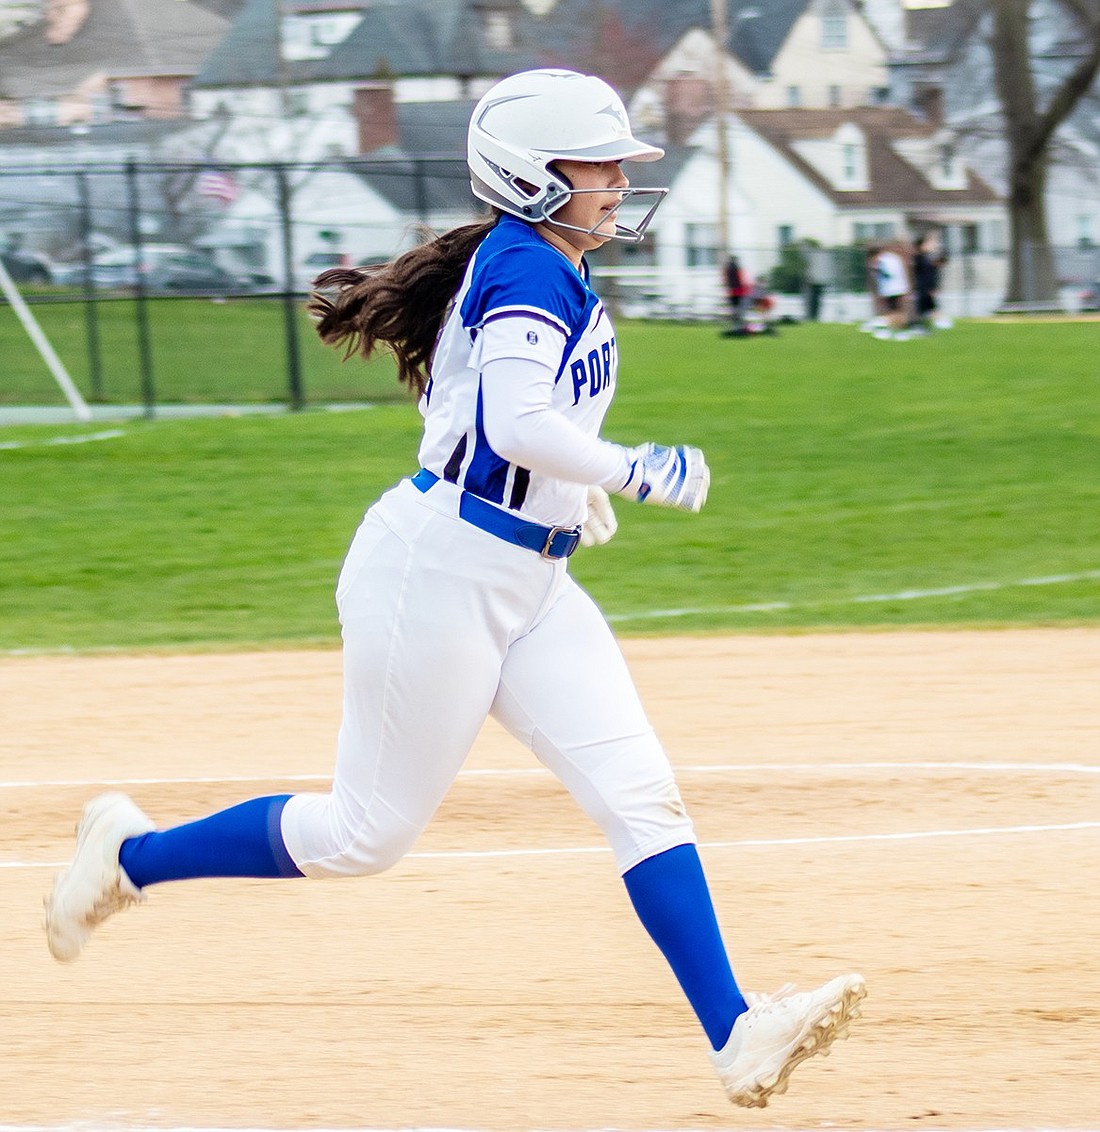 Yvonne Santiago had a double and an RBI in the Lady Rams’ 18-2 loss to Ossining at home on Apr. 30.